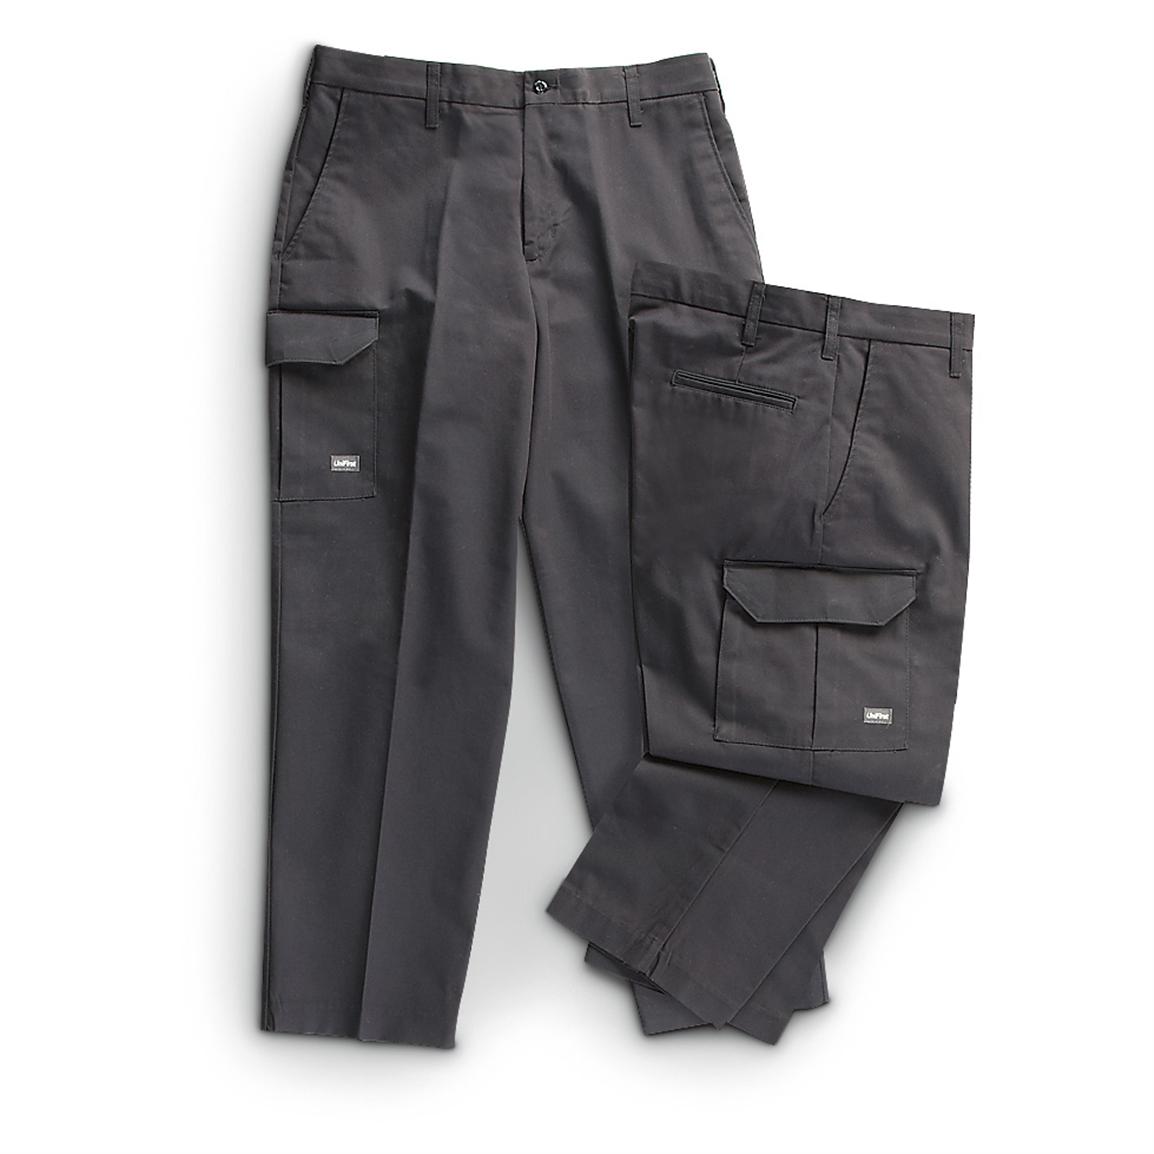 2 Unifirst® 6-pocket Cargo Work Pants - 294875, Jeans & Pants at ...